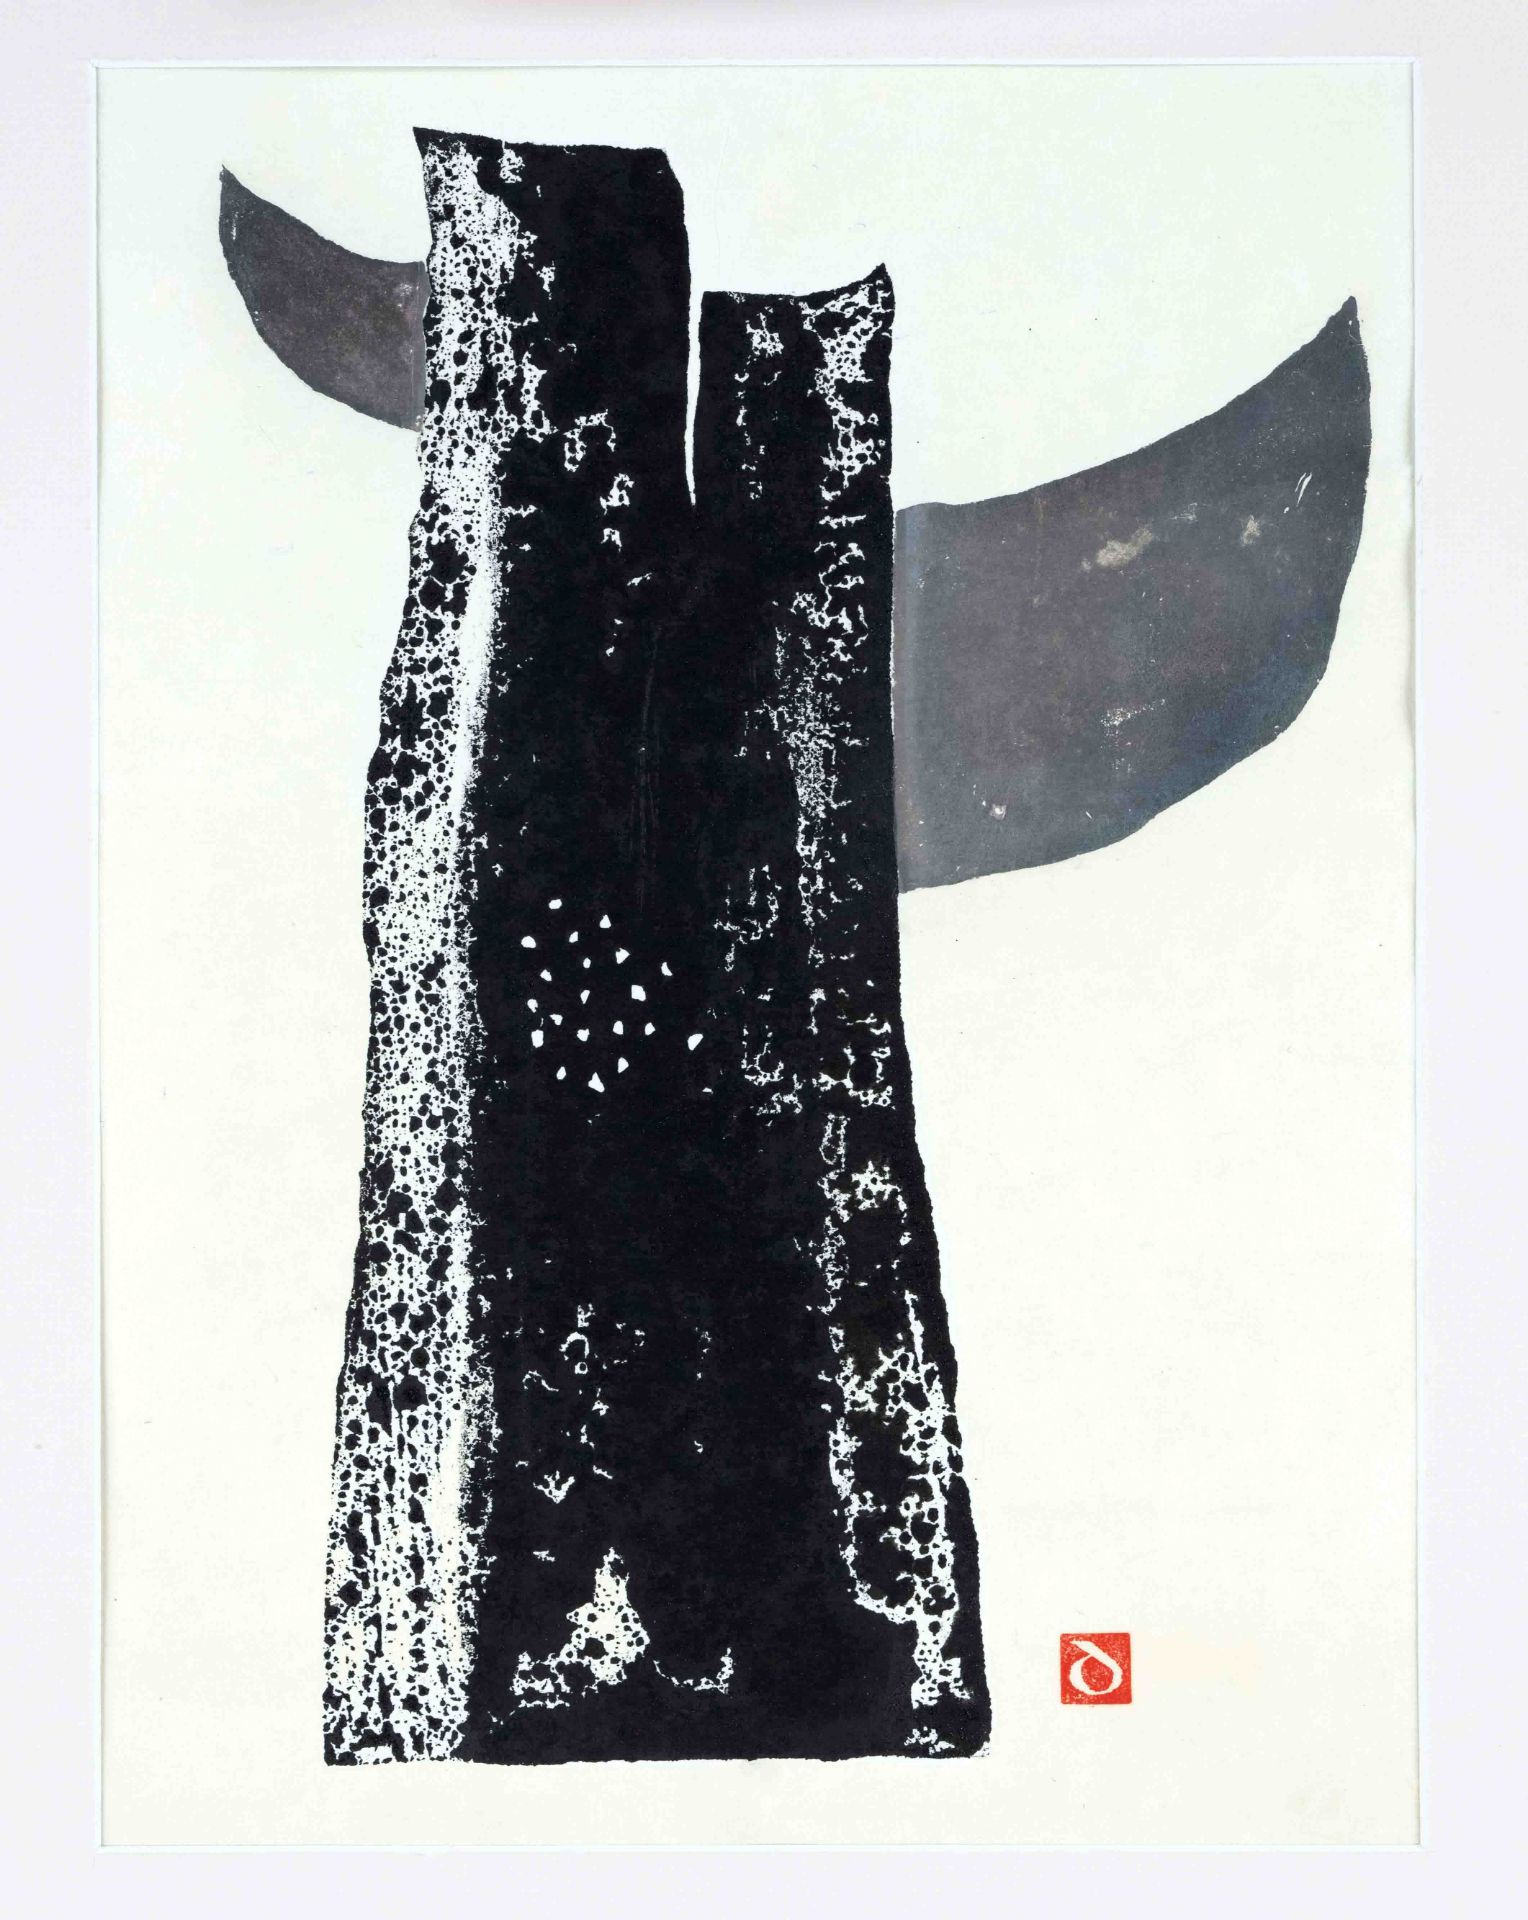 Diethard Potchul (1940-2018), large group of 75 works on paper by the German artist and master